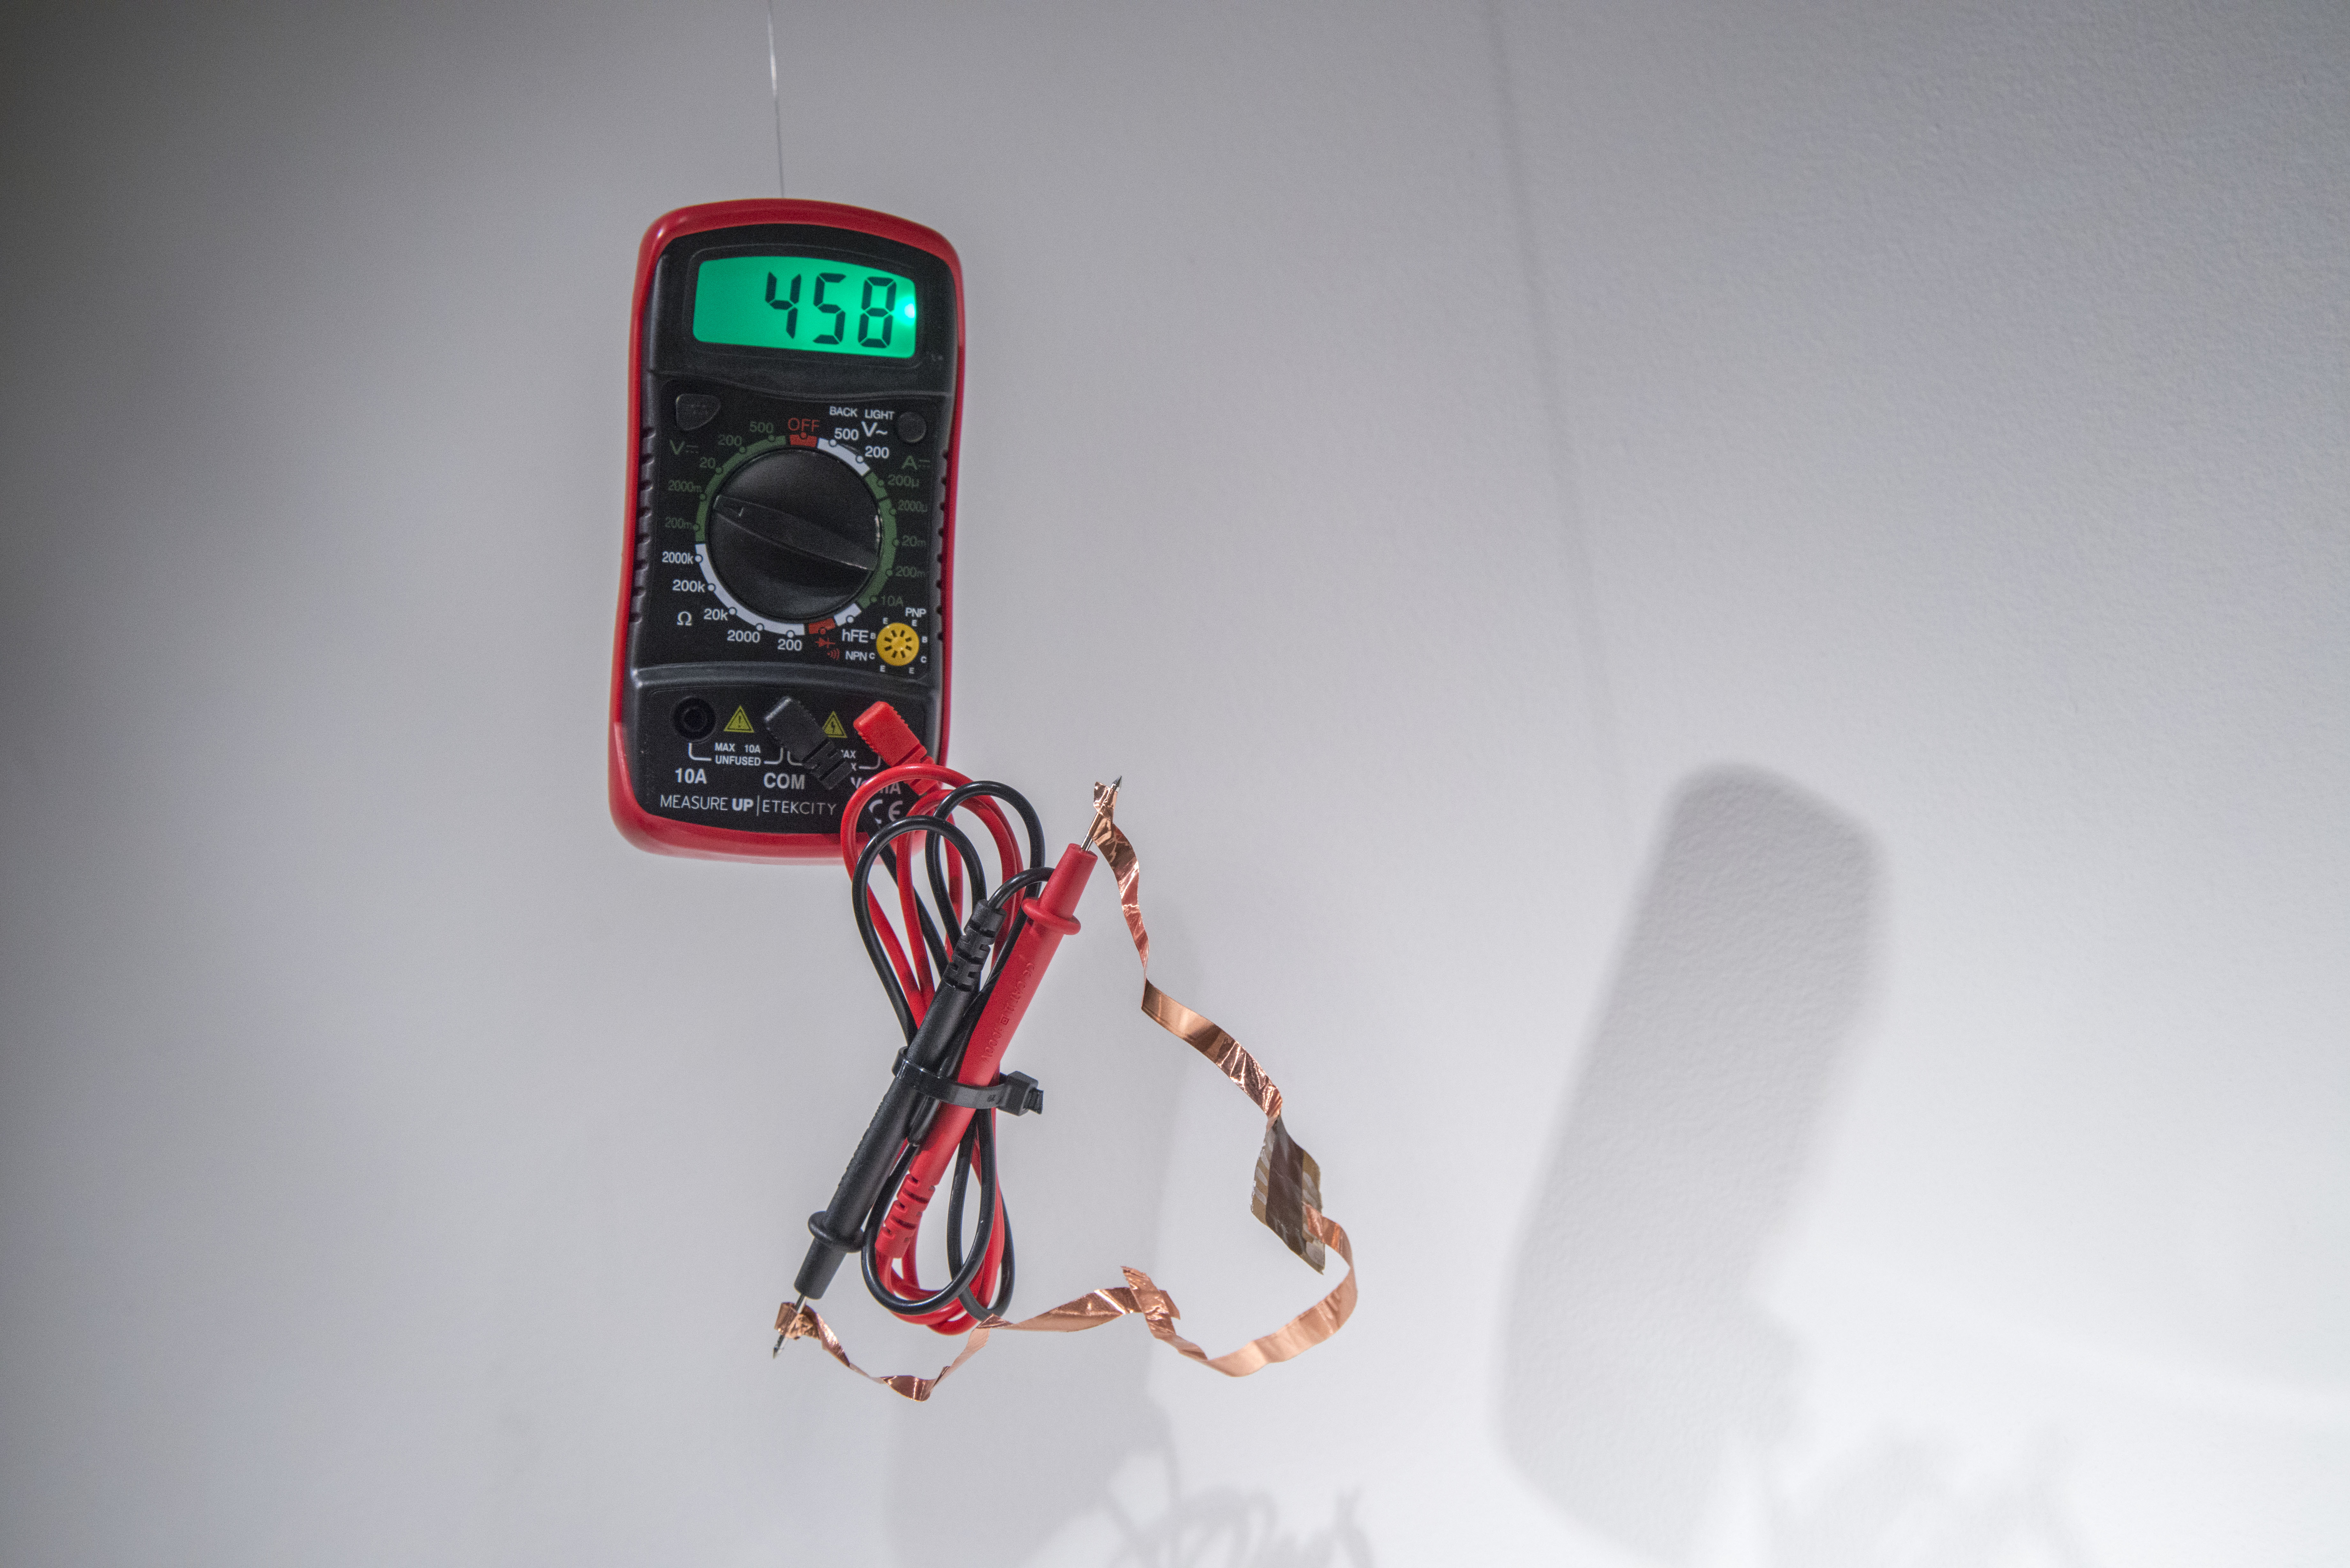 Cellulose solar paper hooked into a voltage meter